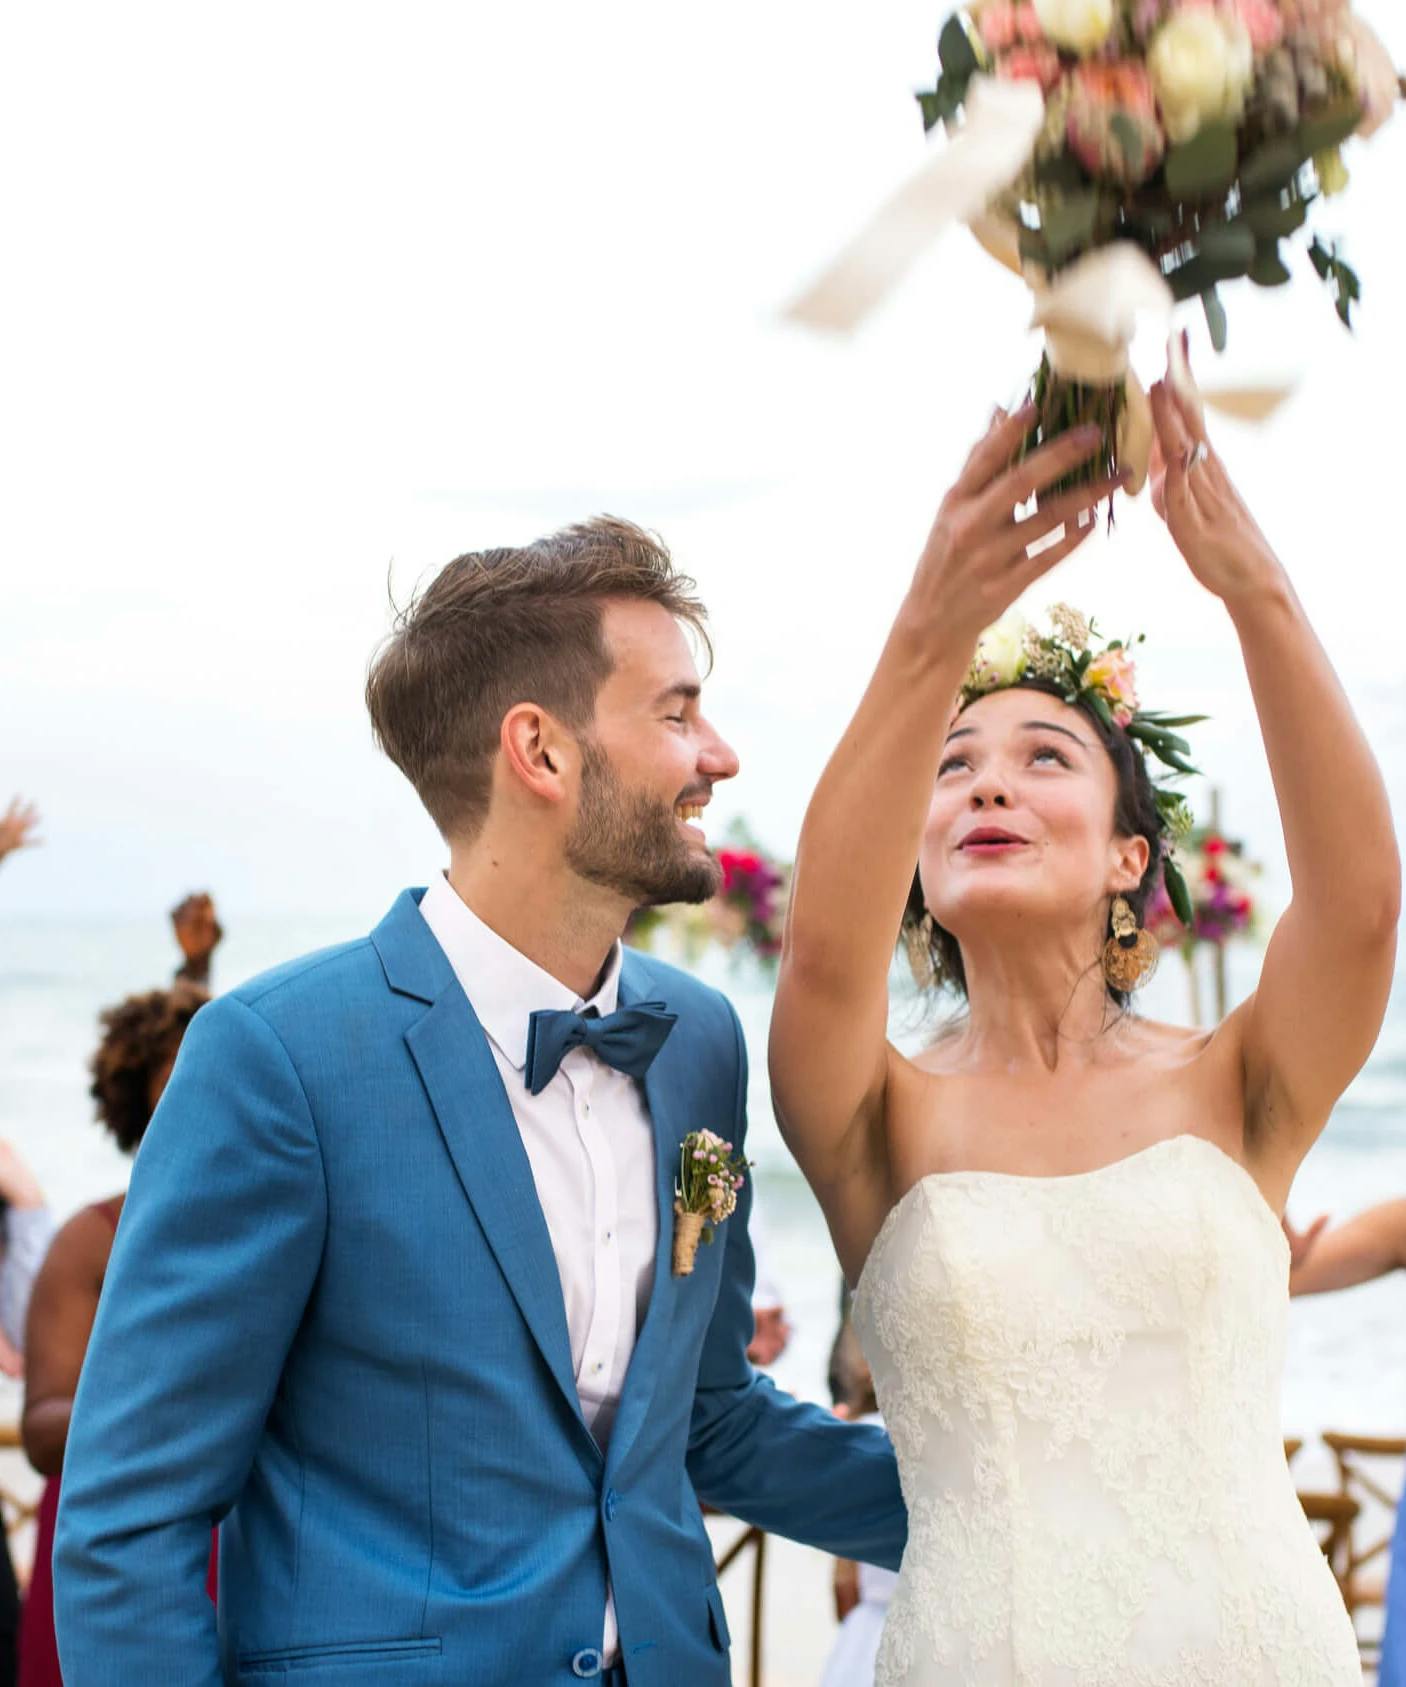 Why Small Weddings Are Making A Big Impression